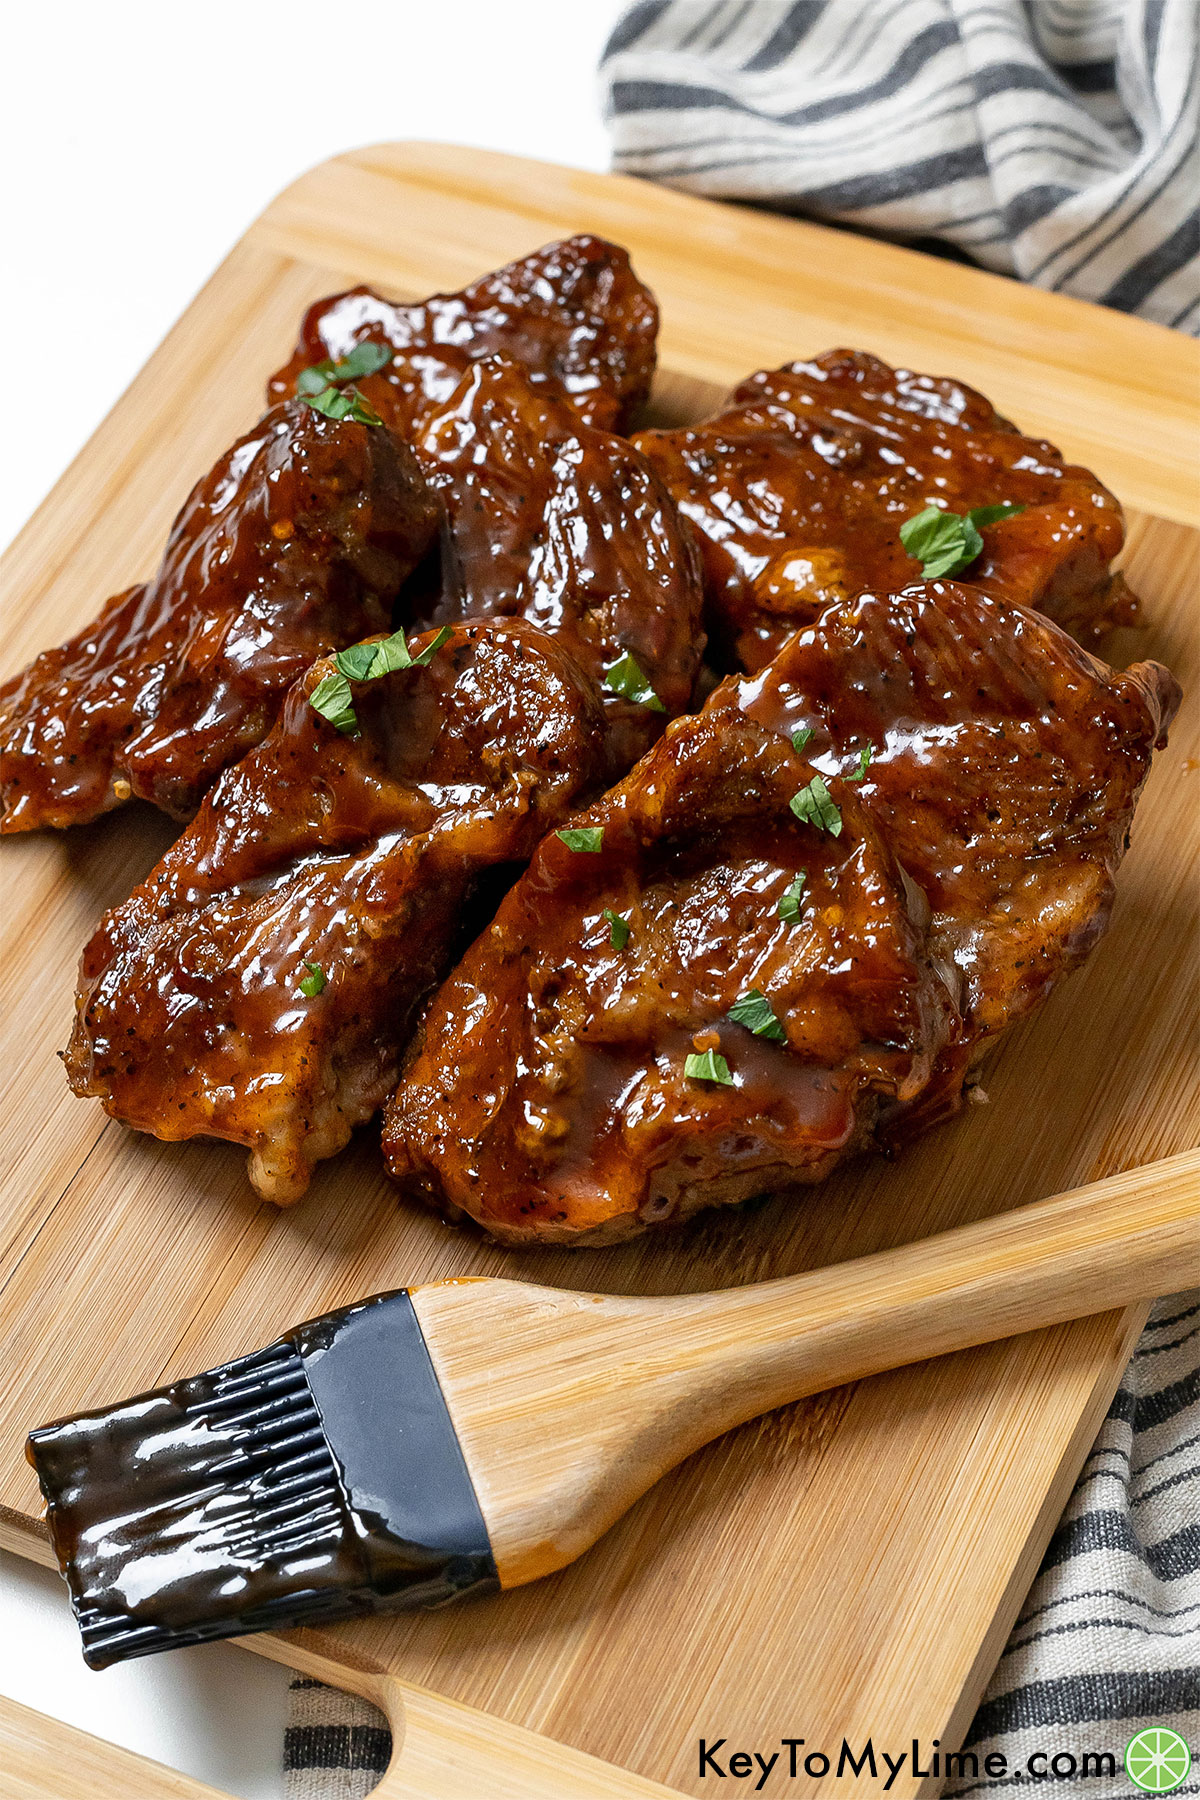 A side image of country style ribs with light glistening off of the BBQ sauce.